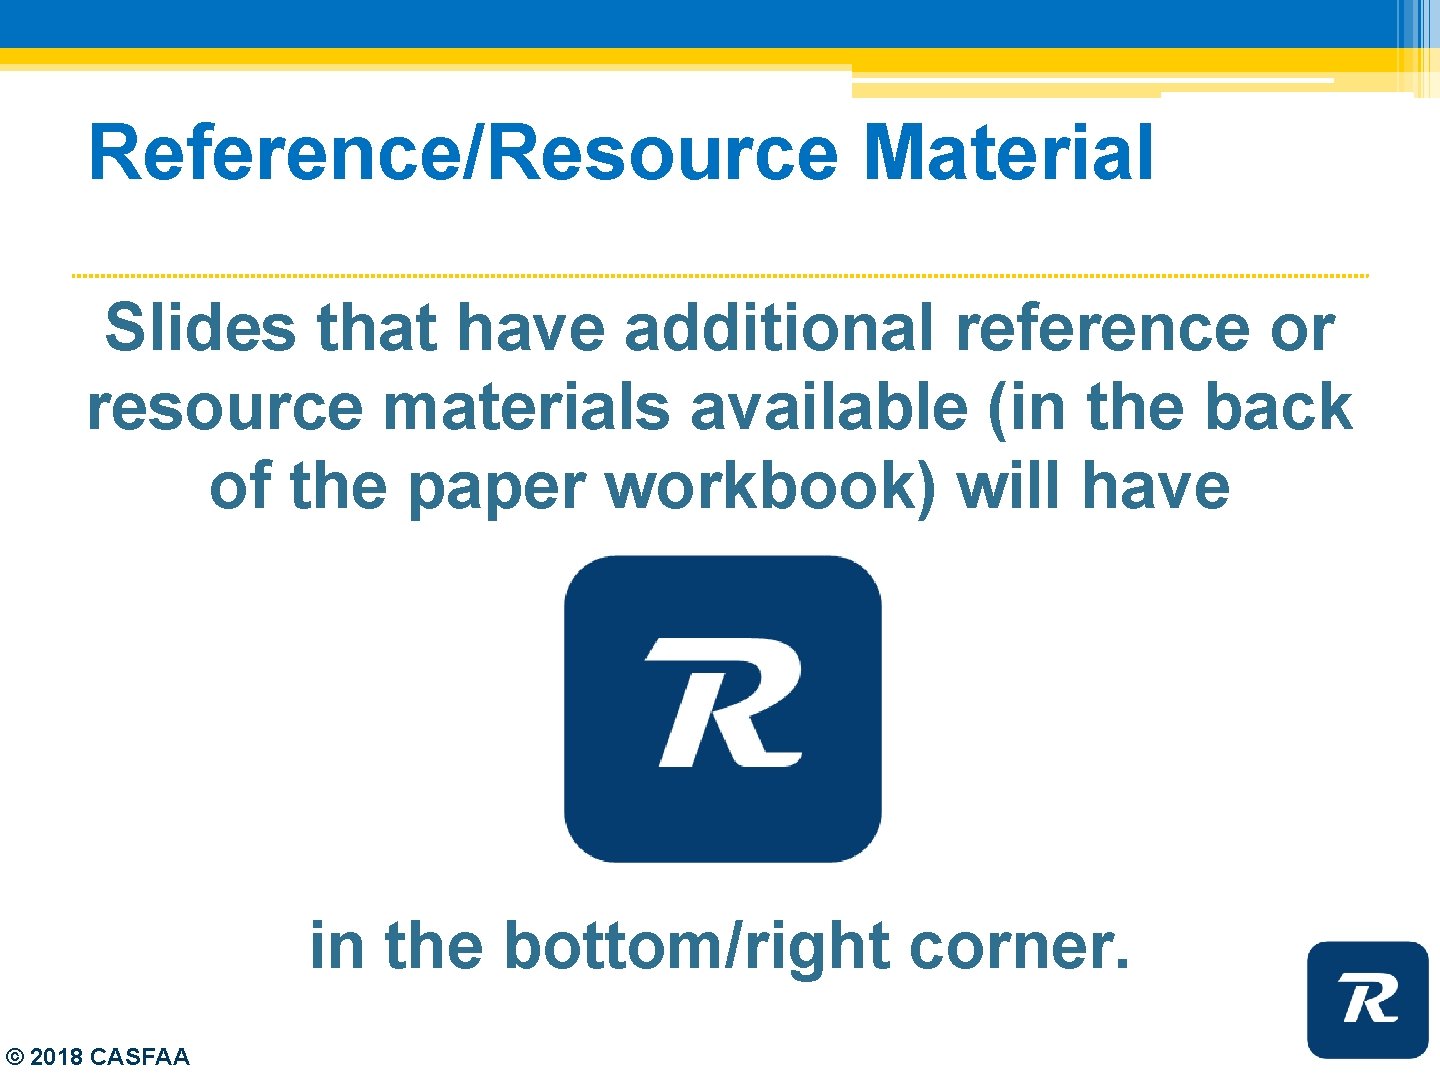 Reference/Resource Material Slides that have additional reference or resource materials available (in the back